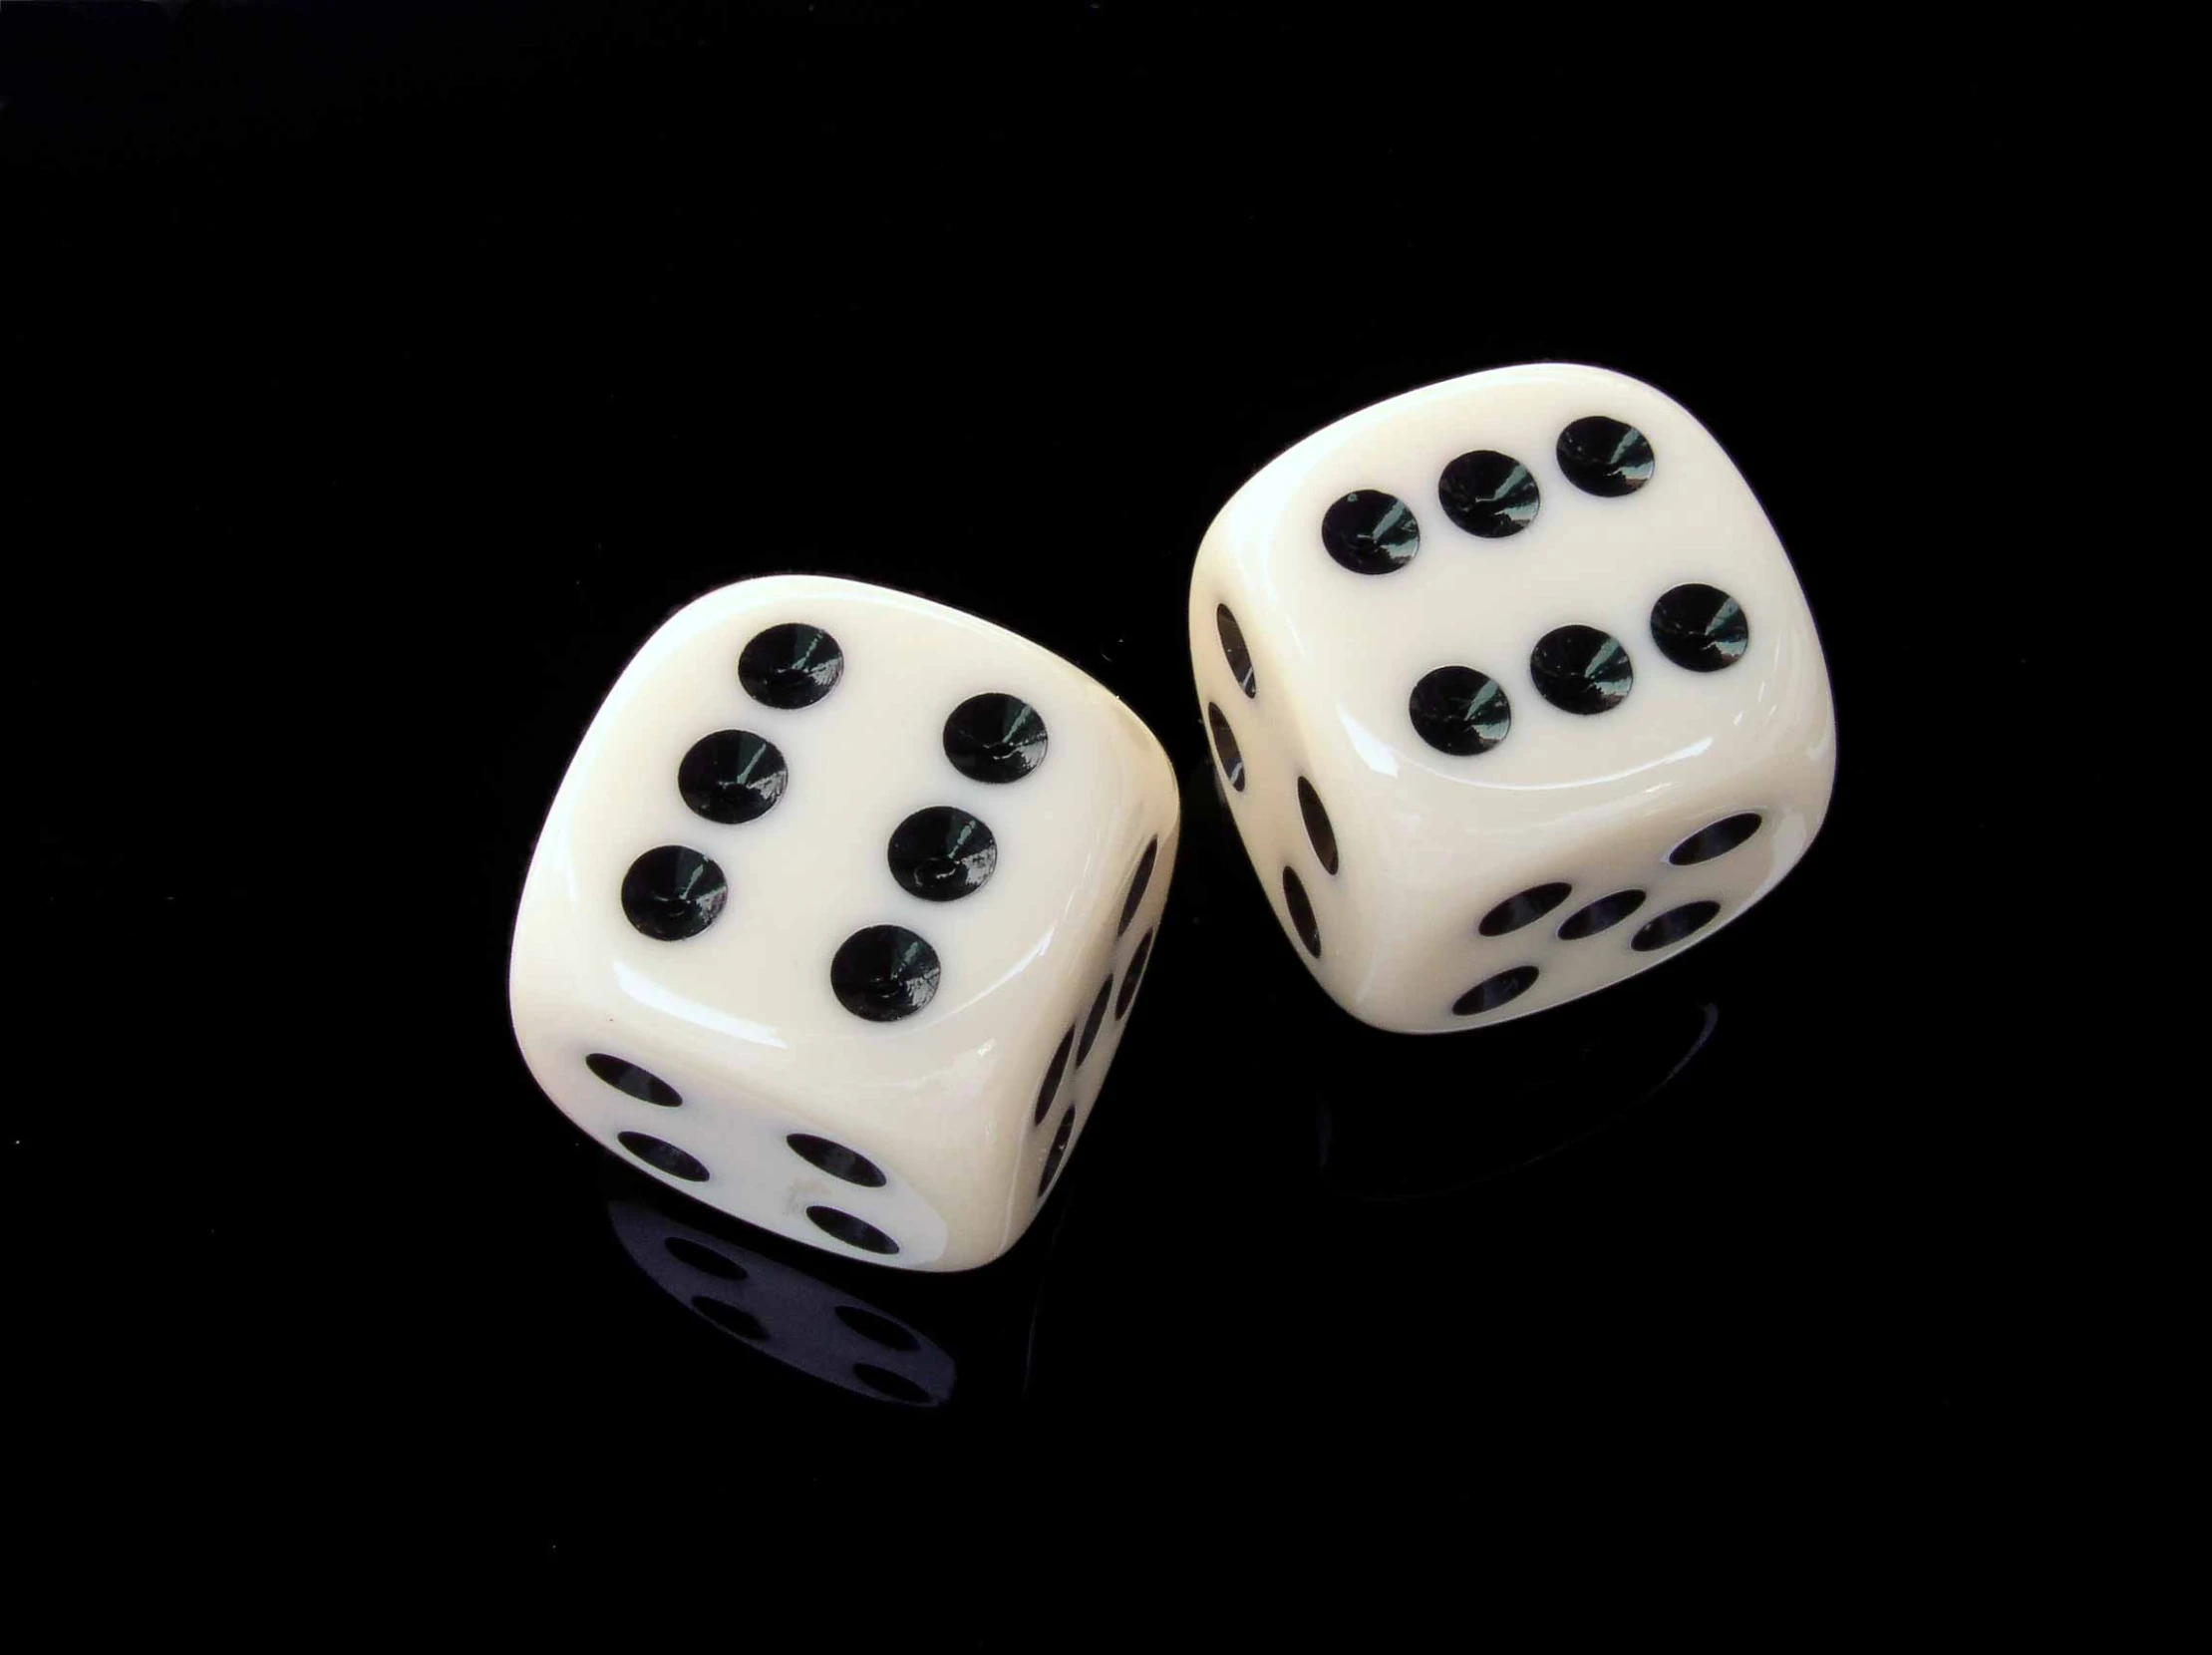 a pair of dice with black dots sitting on a table